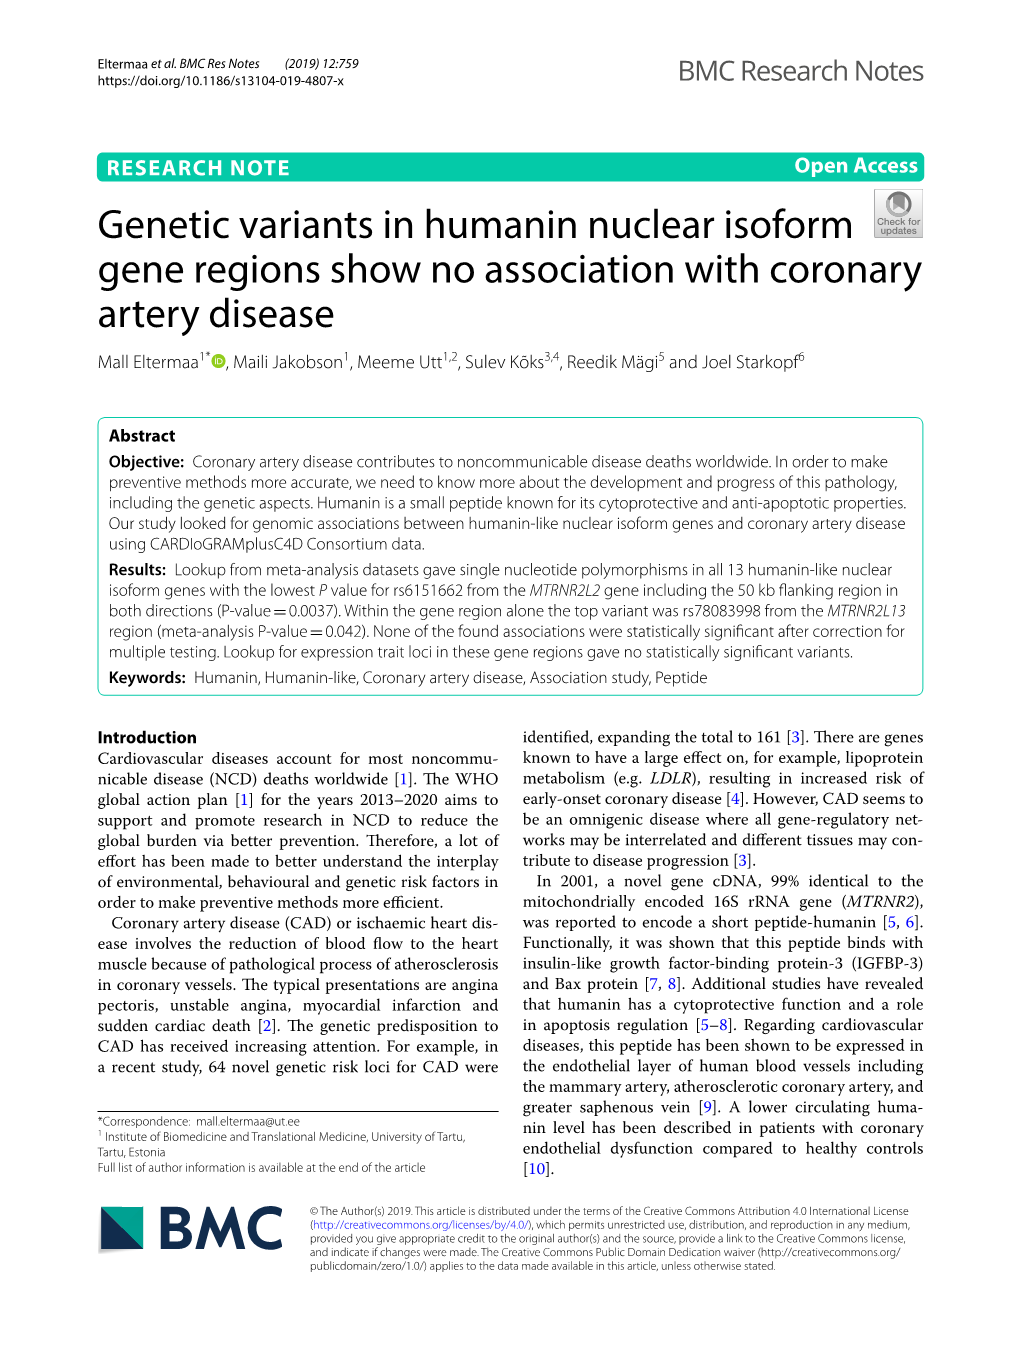 Genetic Variants in Humanin Nuclear Isoform